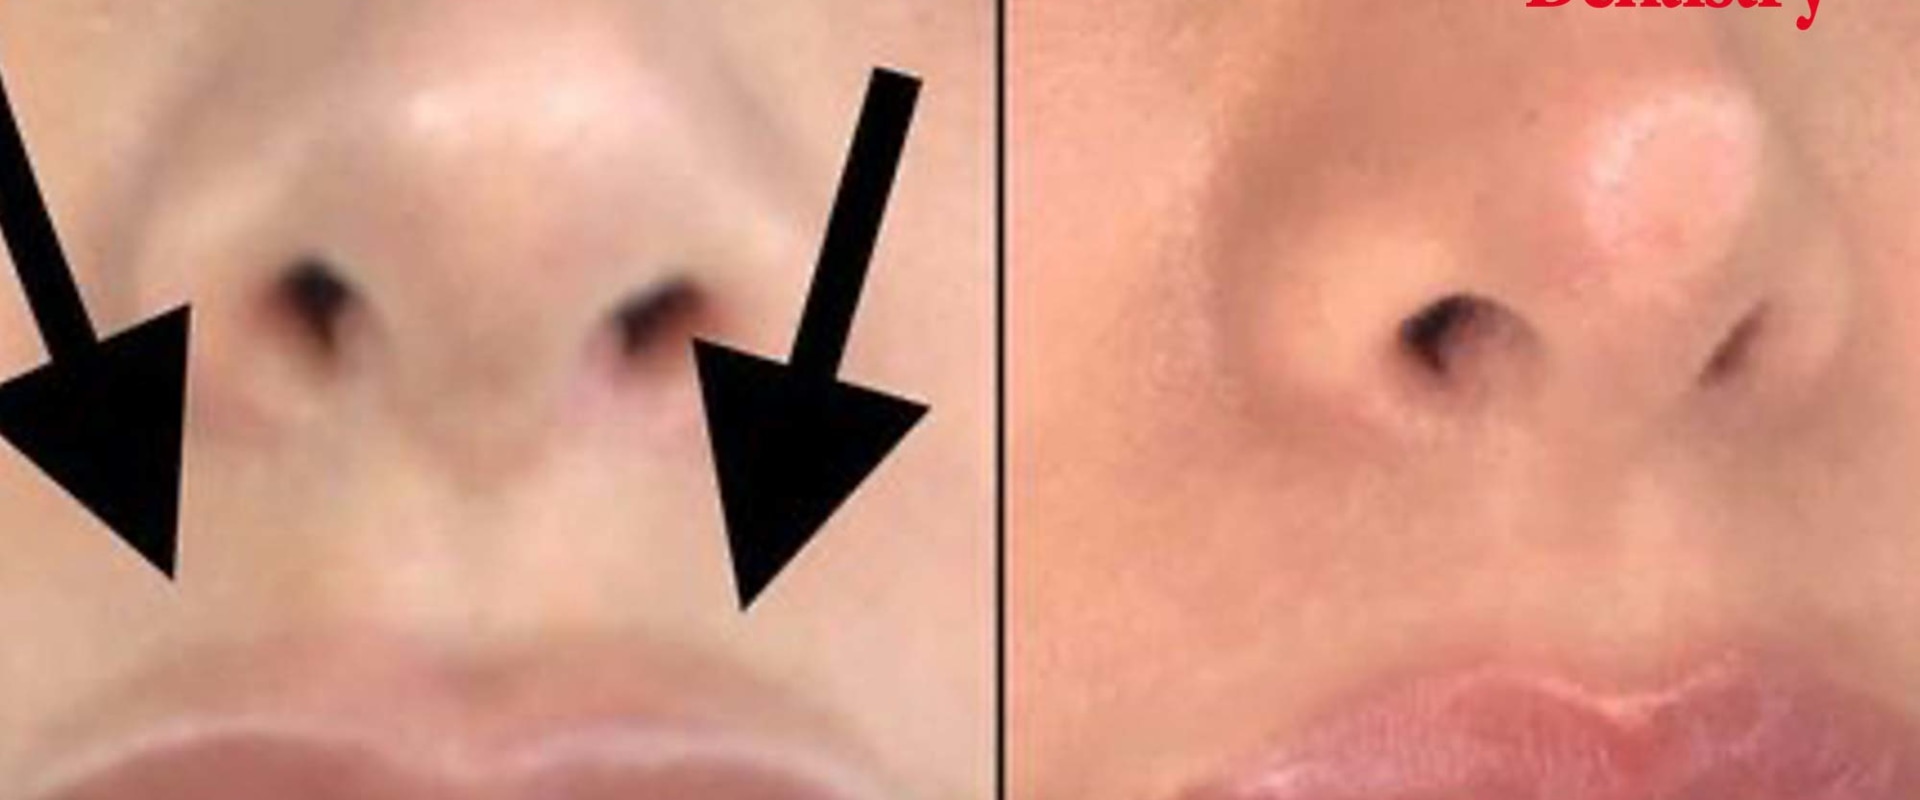 How long after filler can you dissolve it?